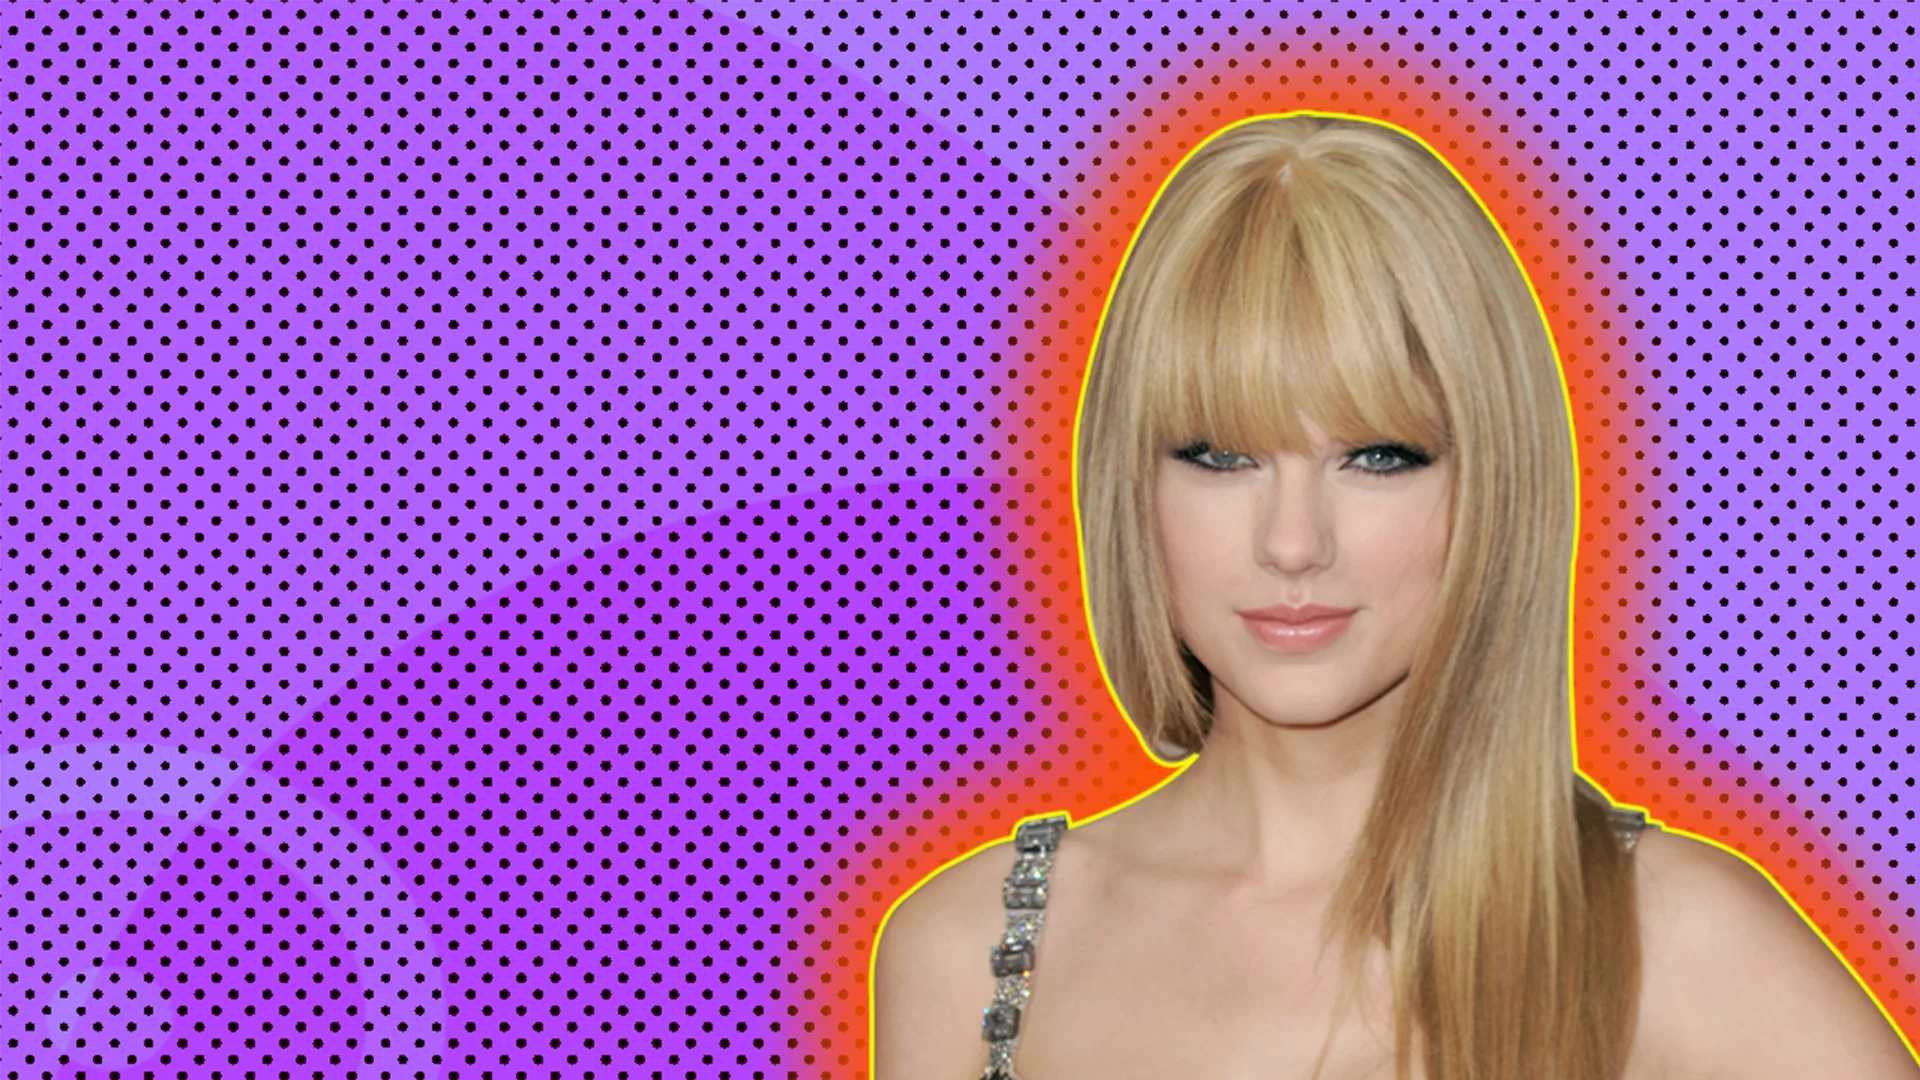 Taylor Swift, outlined by red halo effect on purple background dotted with black.